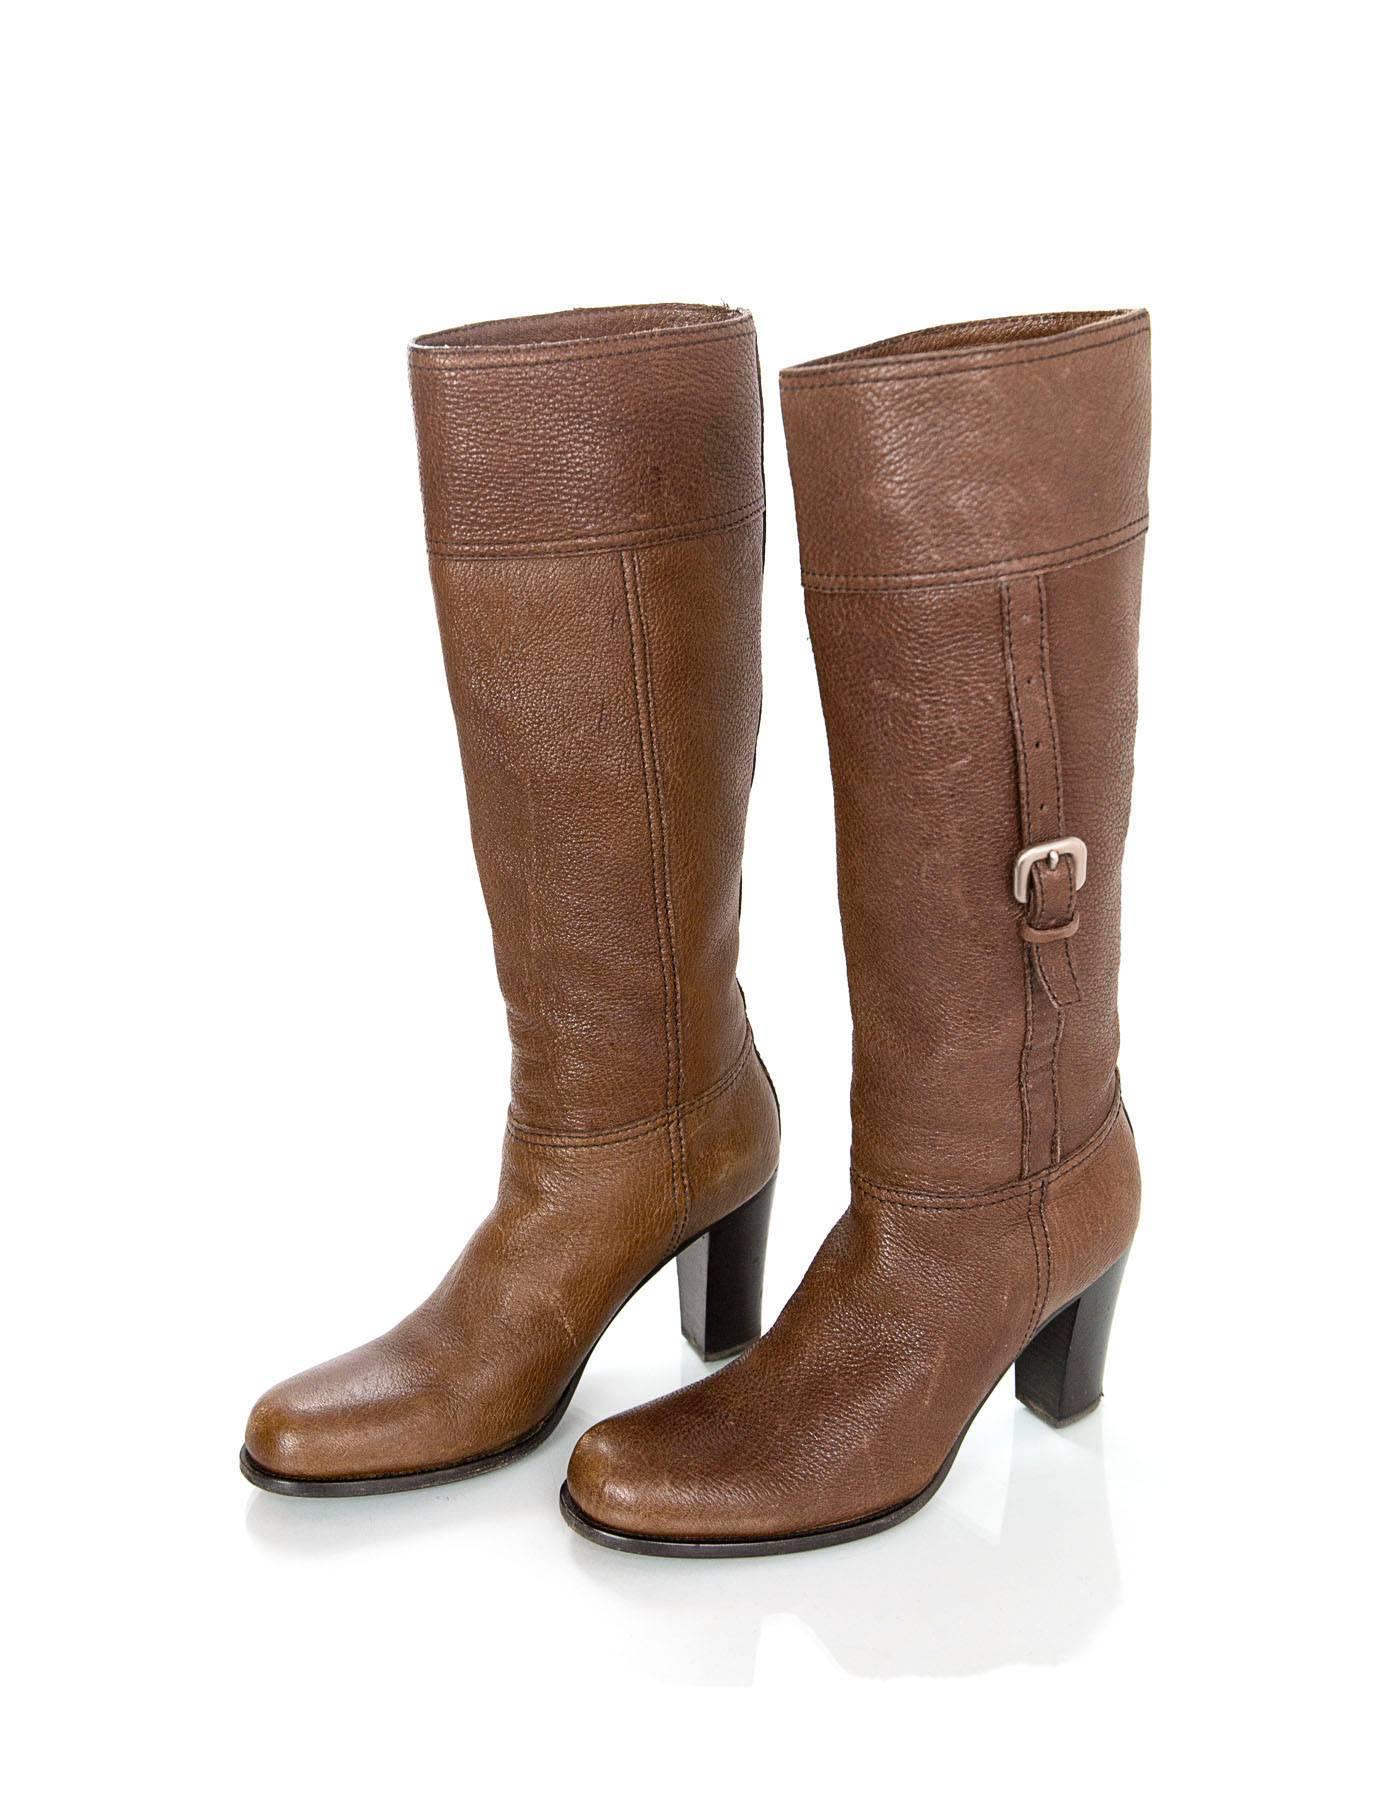 Prada Brown Leather Boots 
Features buckles on sides for cinching shaft

Made In: Italy
Color: Brown
Materials: Leather
Closure/Opening: Pull on
Sole Stamp: Prada Vero Cuoio 36 1/2 Made in Italy 
Overall Condition: Very good pre-owned